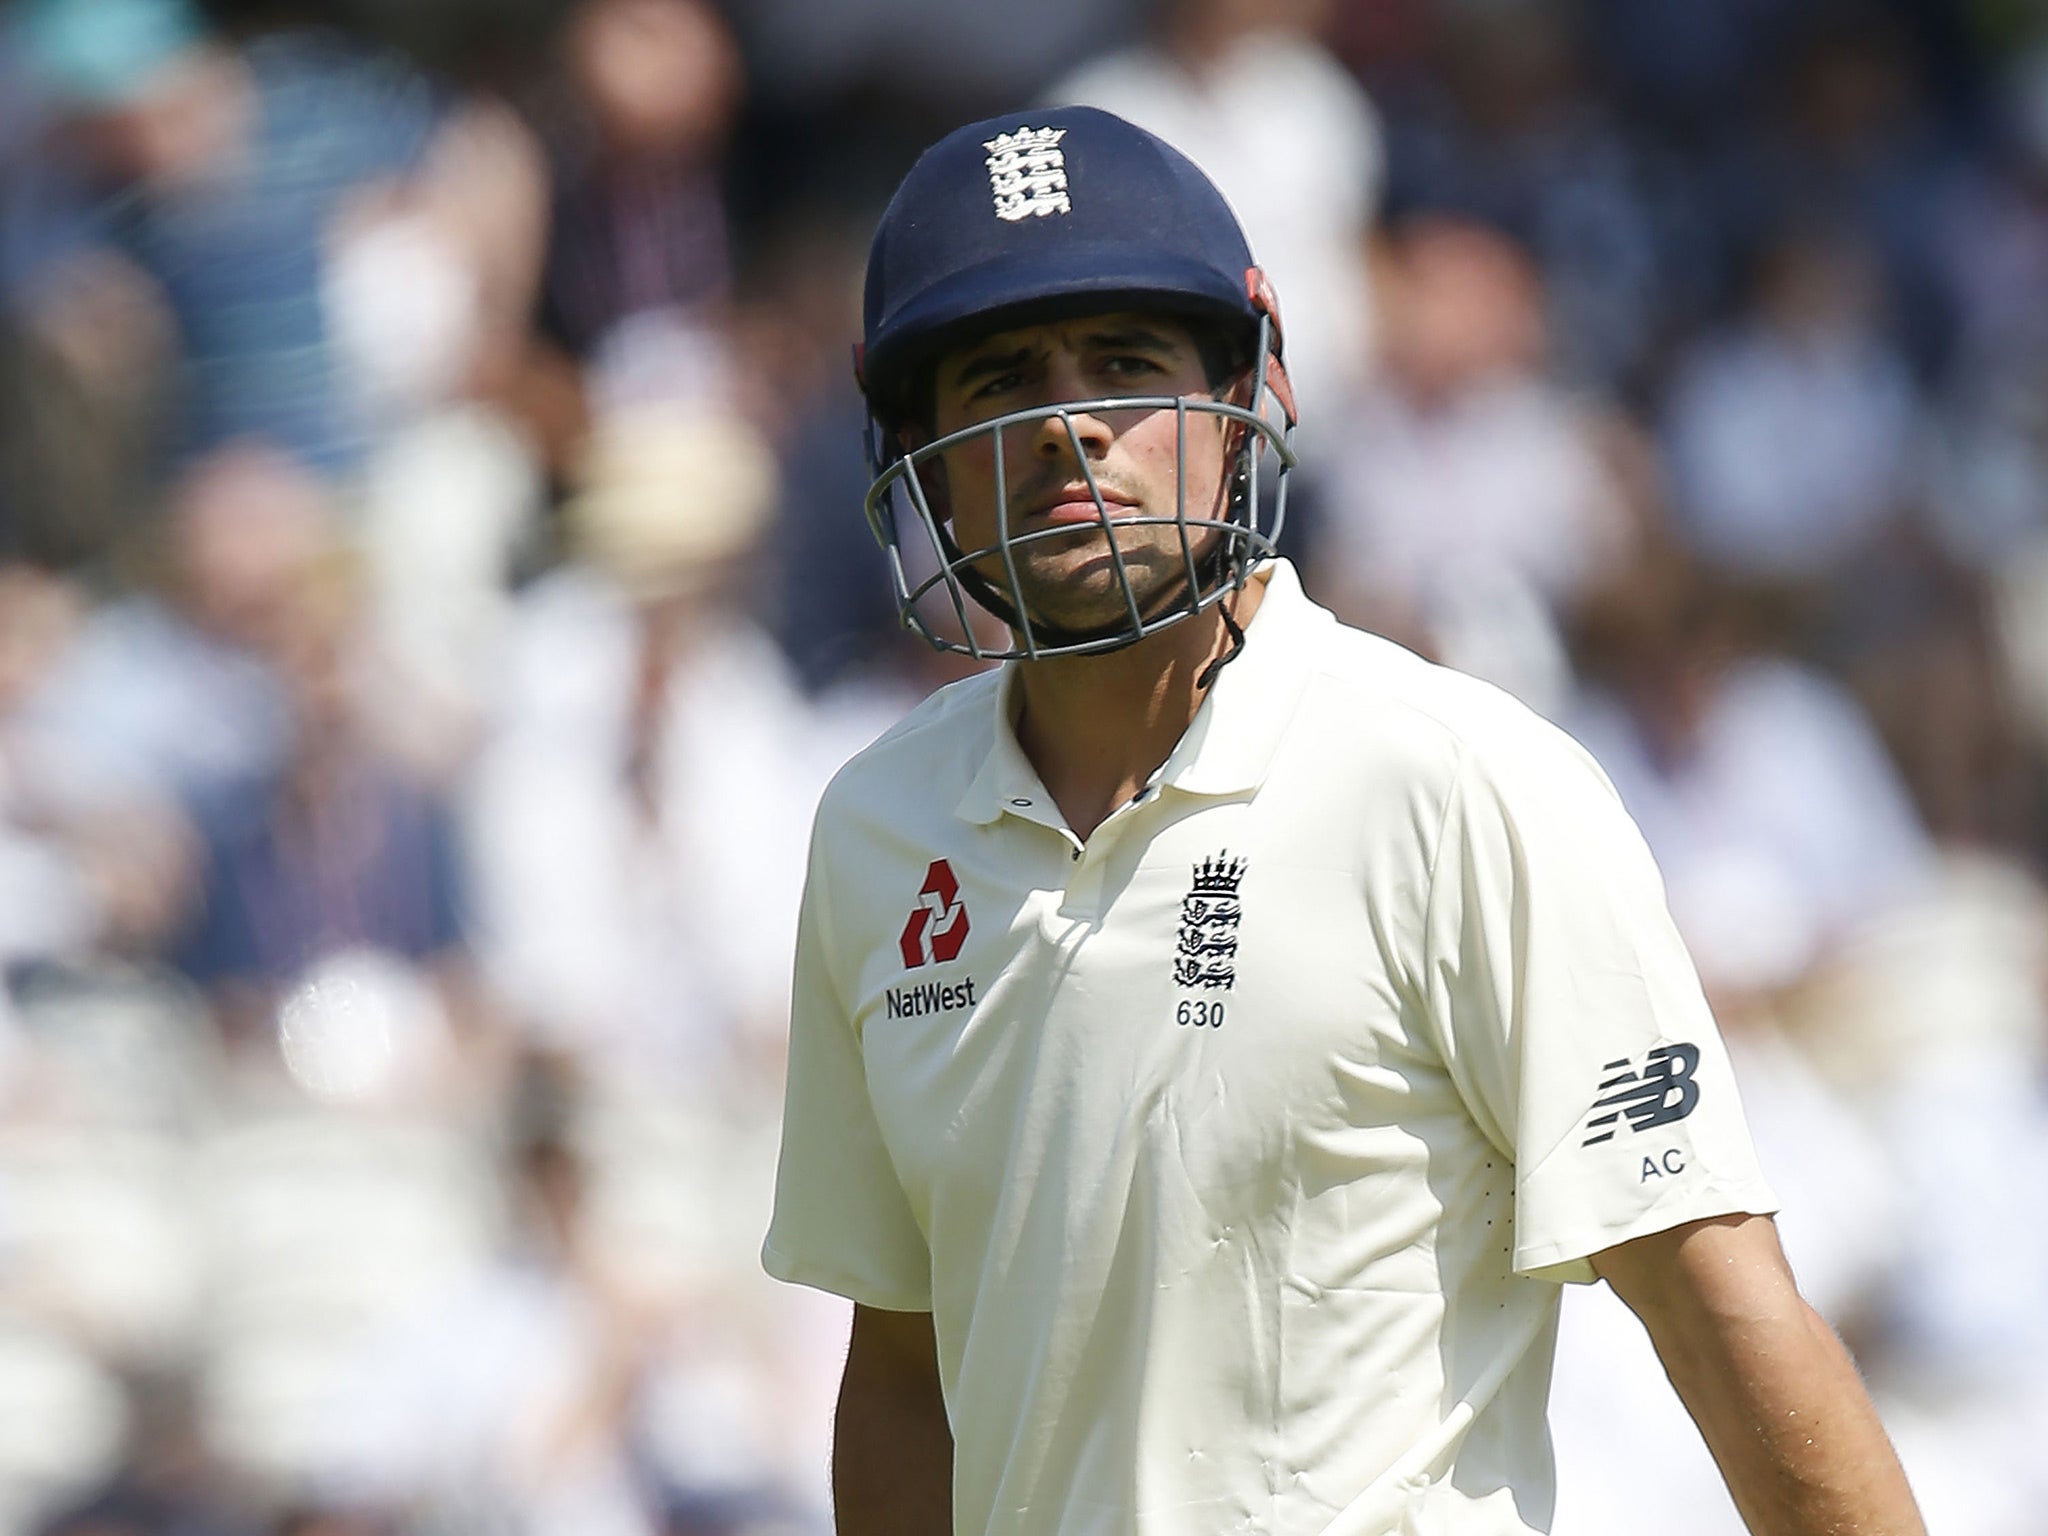 Alastair Cook resigned as captain in February following the 4-0 series defeat in India